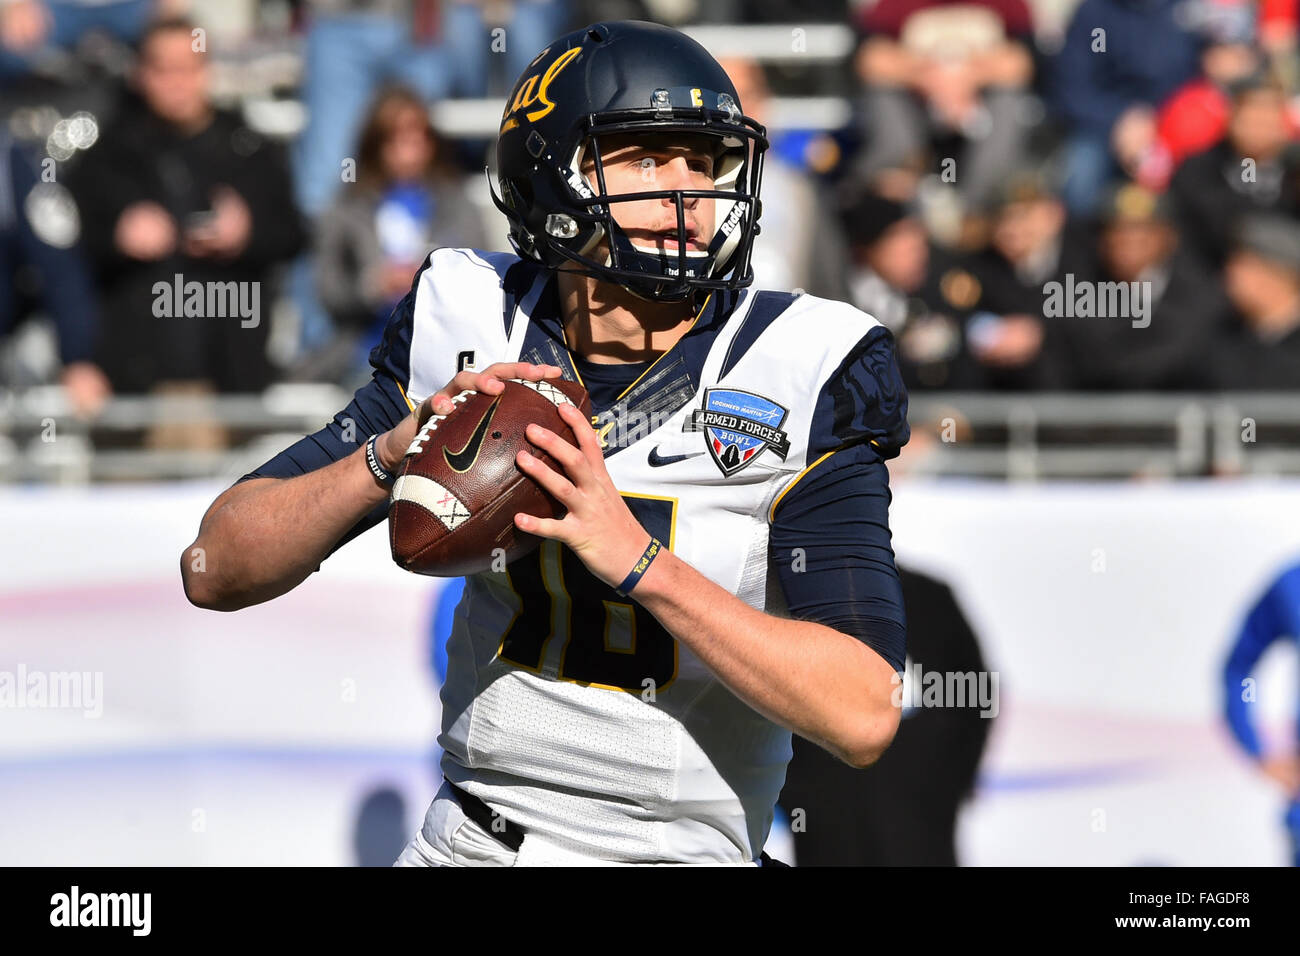 December 29, 2015: California Golden Bears quarterback Jared Goff (16) passed for 467 yards on 25 of 37 passing and threw six touchdowns tied for the second most in FBS bowl history during the Lockheed Martin Armed Forces Bowl between California Golden Bears and the Air Force Falcons at Amon G. Carter Stadium, Ft. Worth, Texas. Shane Roper/CSM Stock Photo